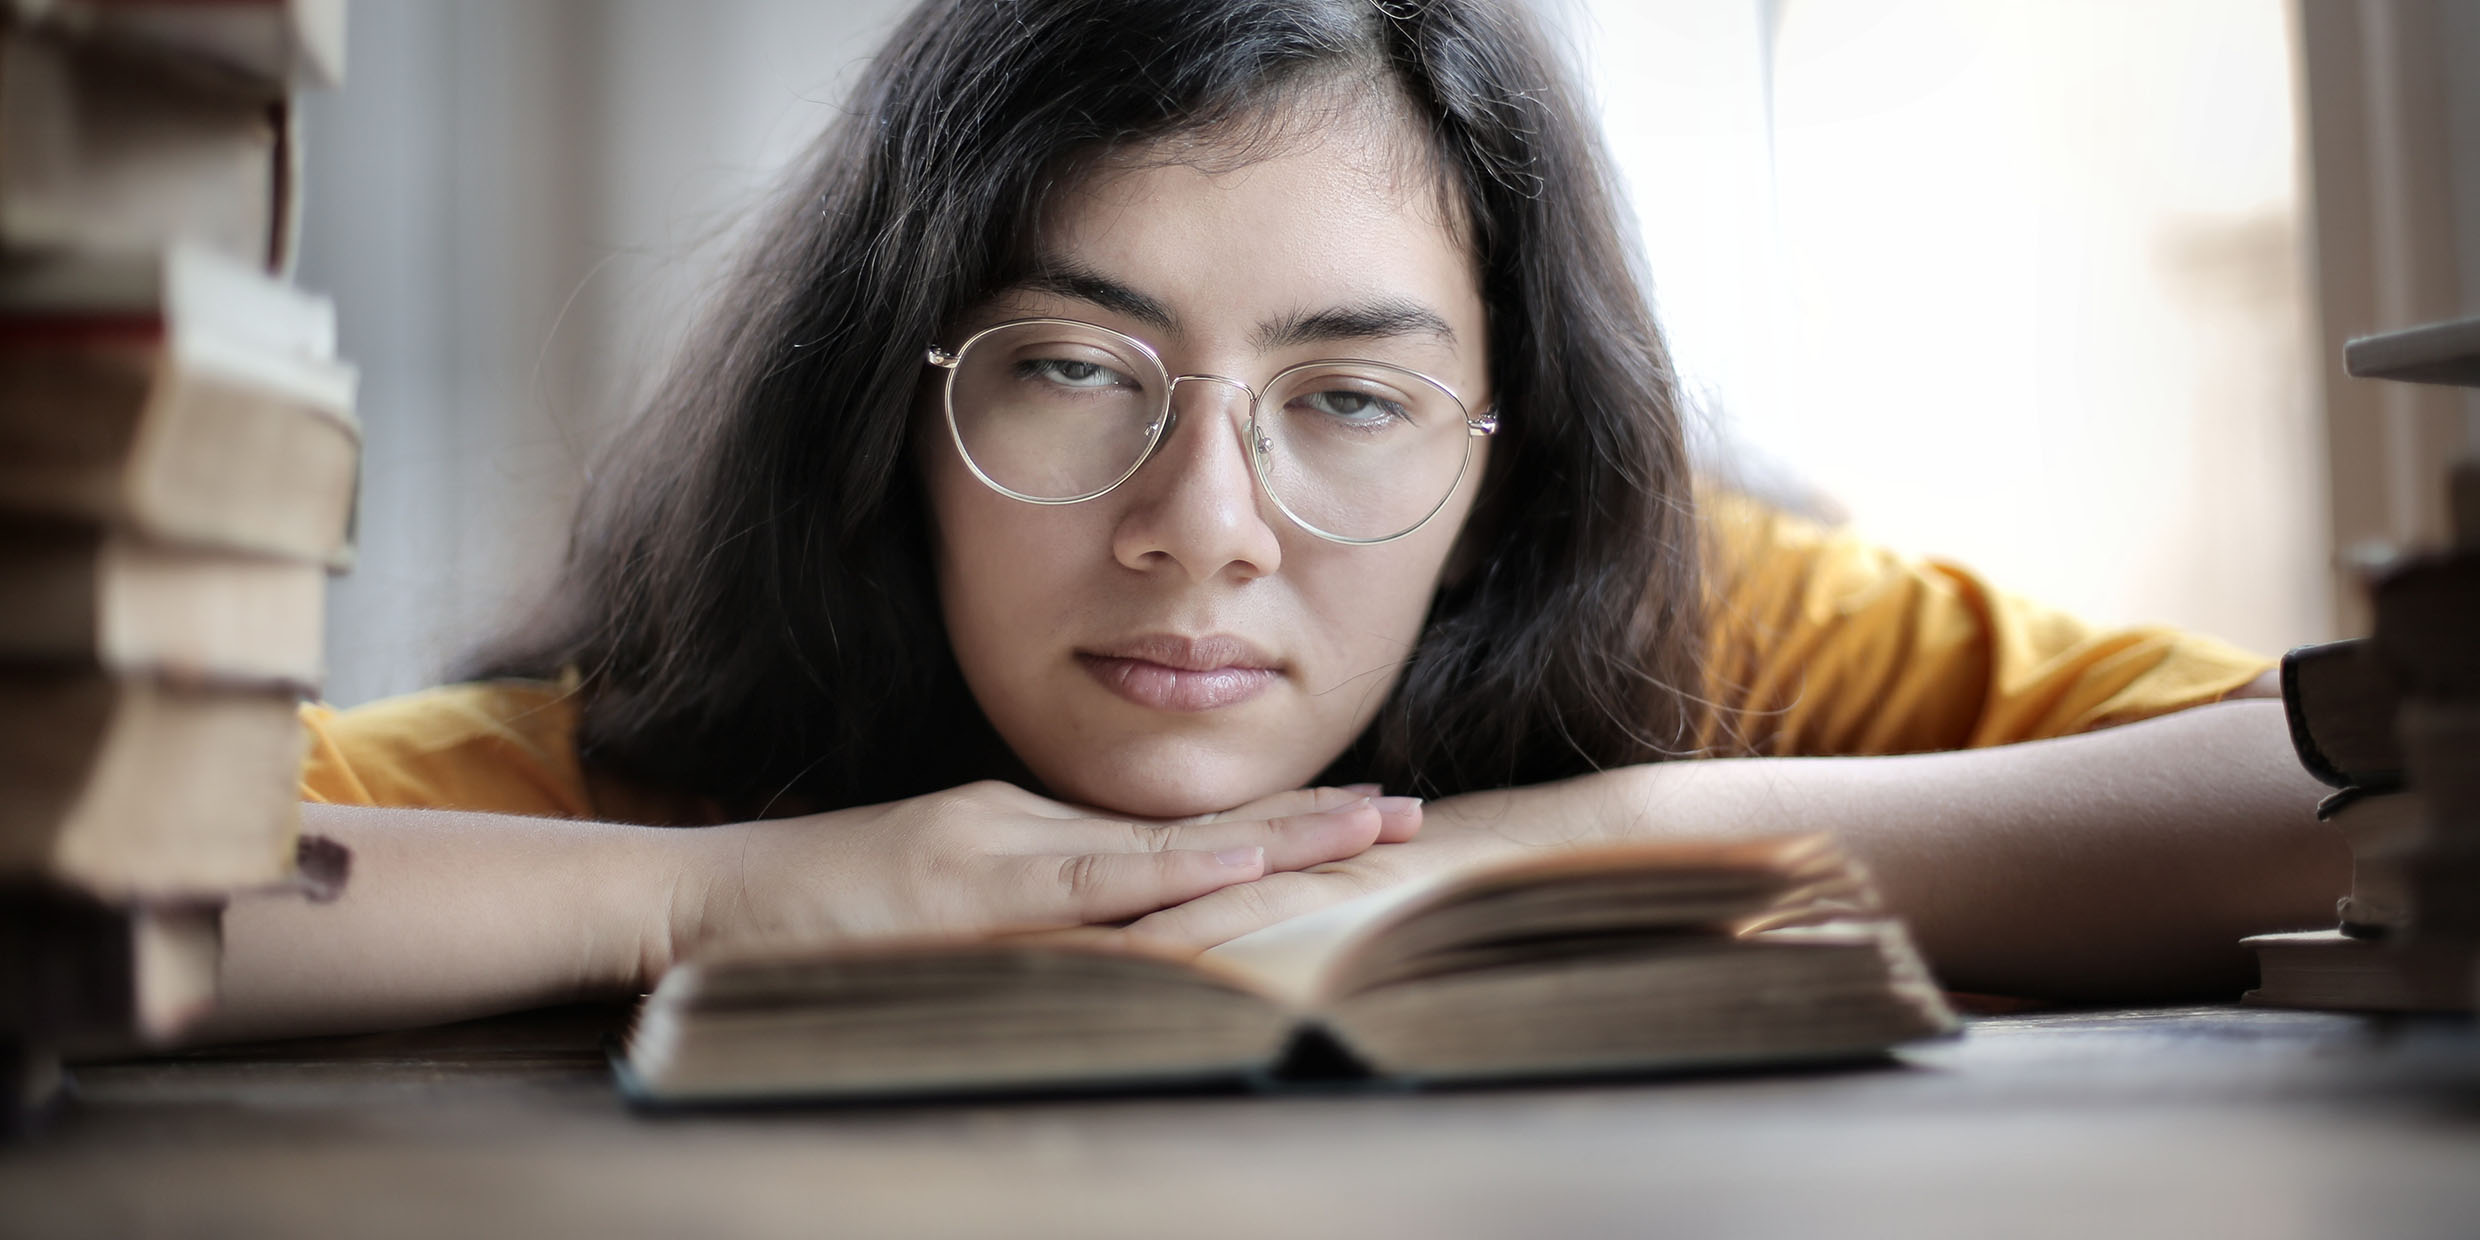 Image of bored woman reading books